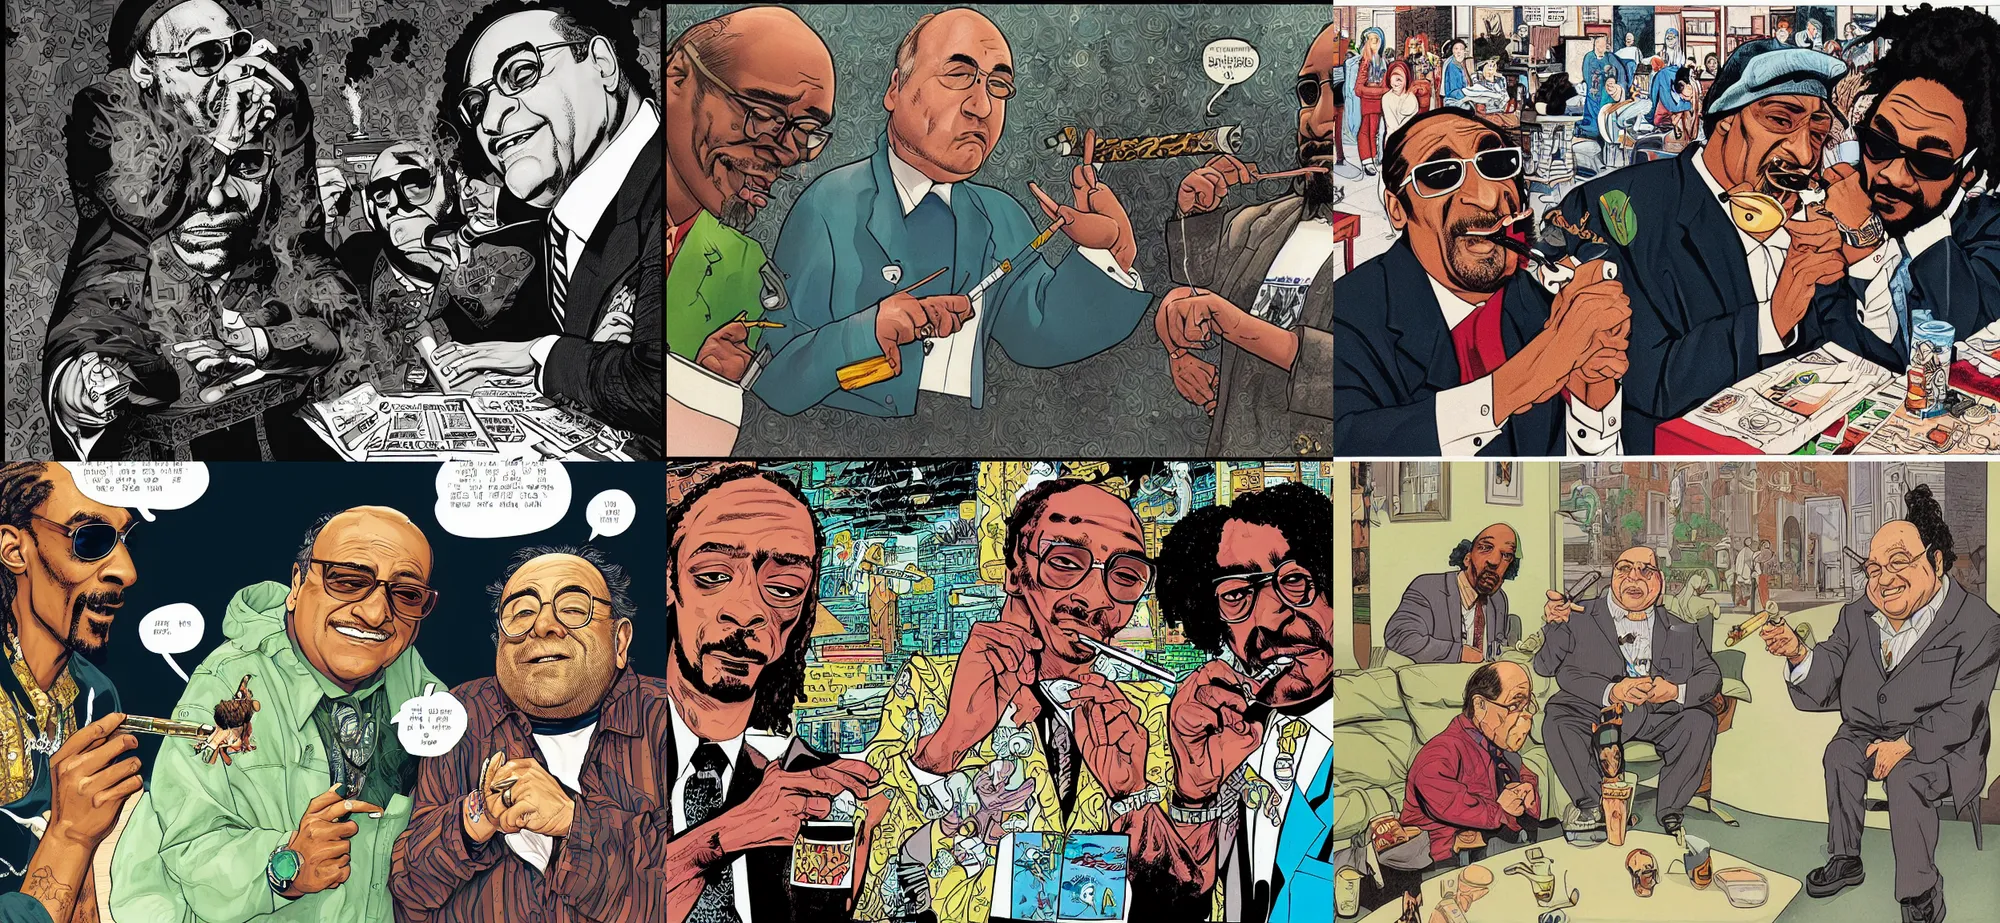 Prompt: A beautiful, stunning, extremely detailed comic book illustration by John Higgins showing Snoop Dogg and Danny DeVito smoking a joint